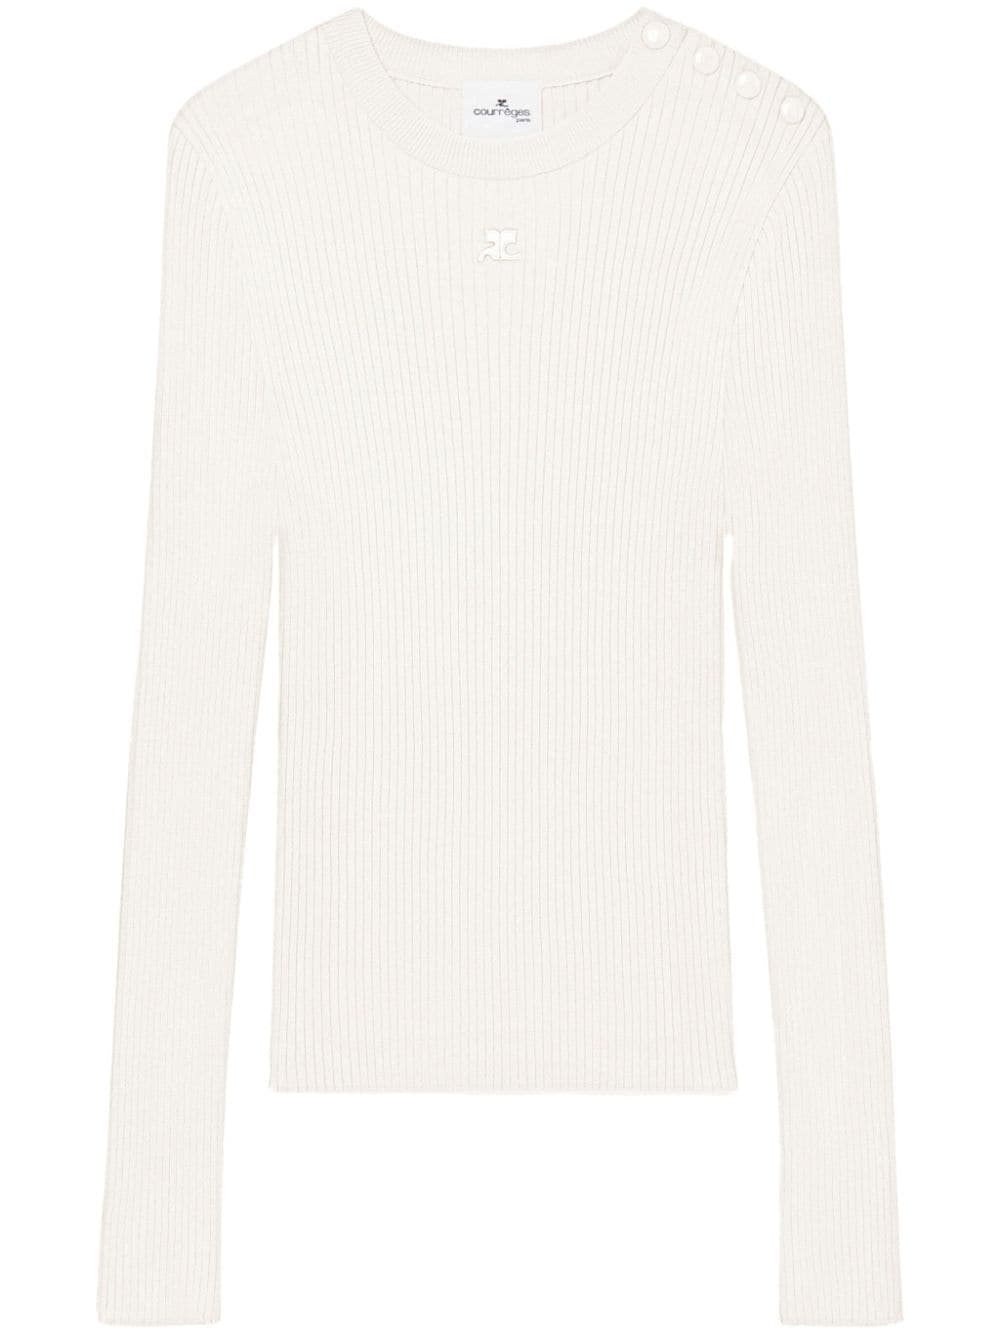 Courrèges embroidered logo ribbed-knit sweater